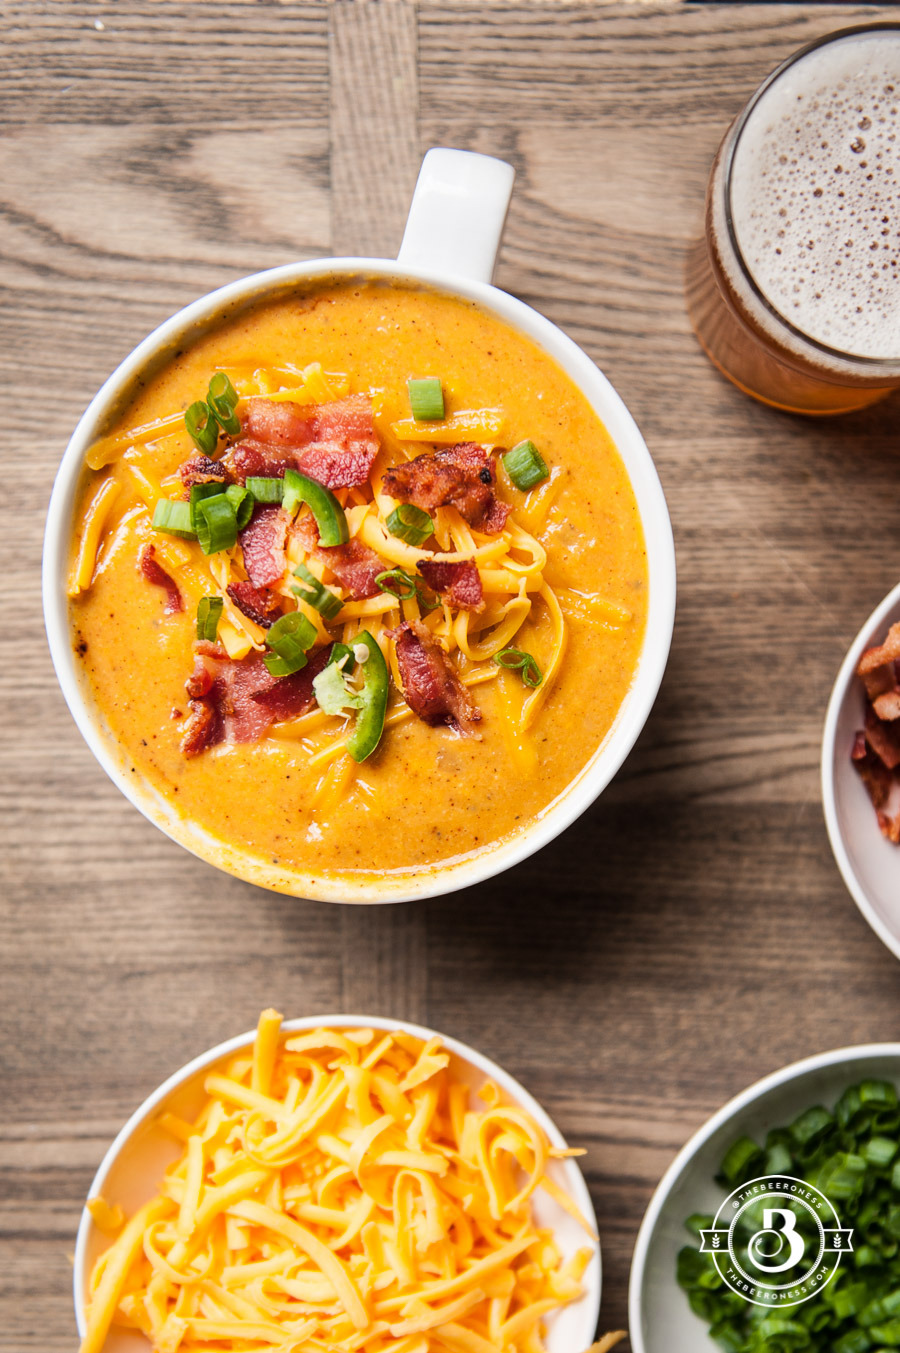 guardians-of-the-food:  Loaded Beer Bacon and Corn Chowder